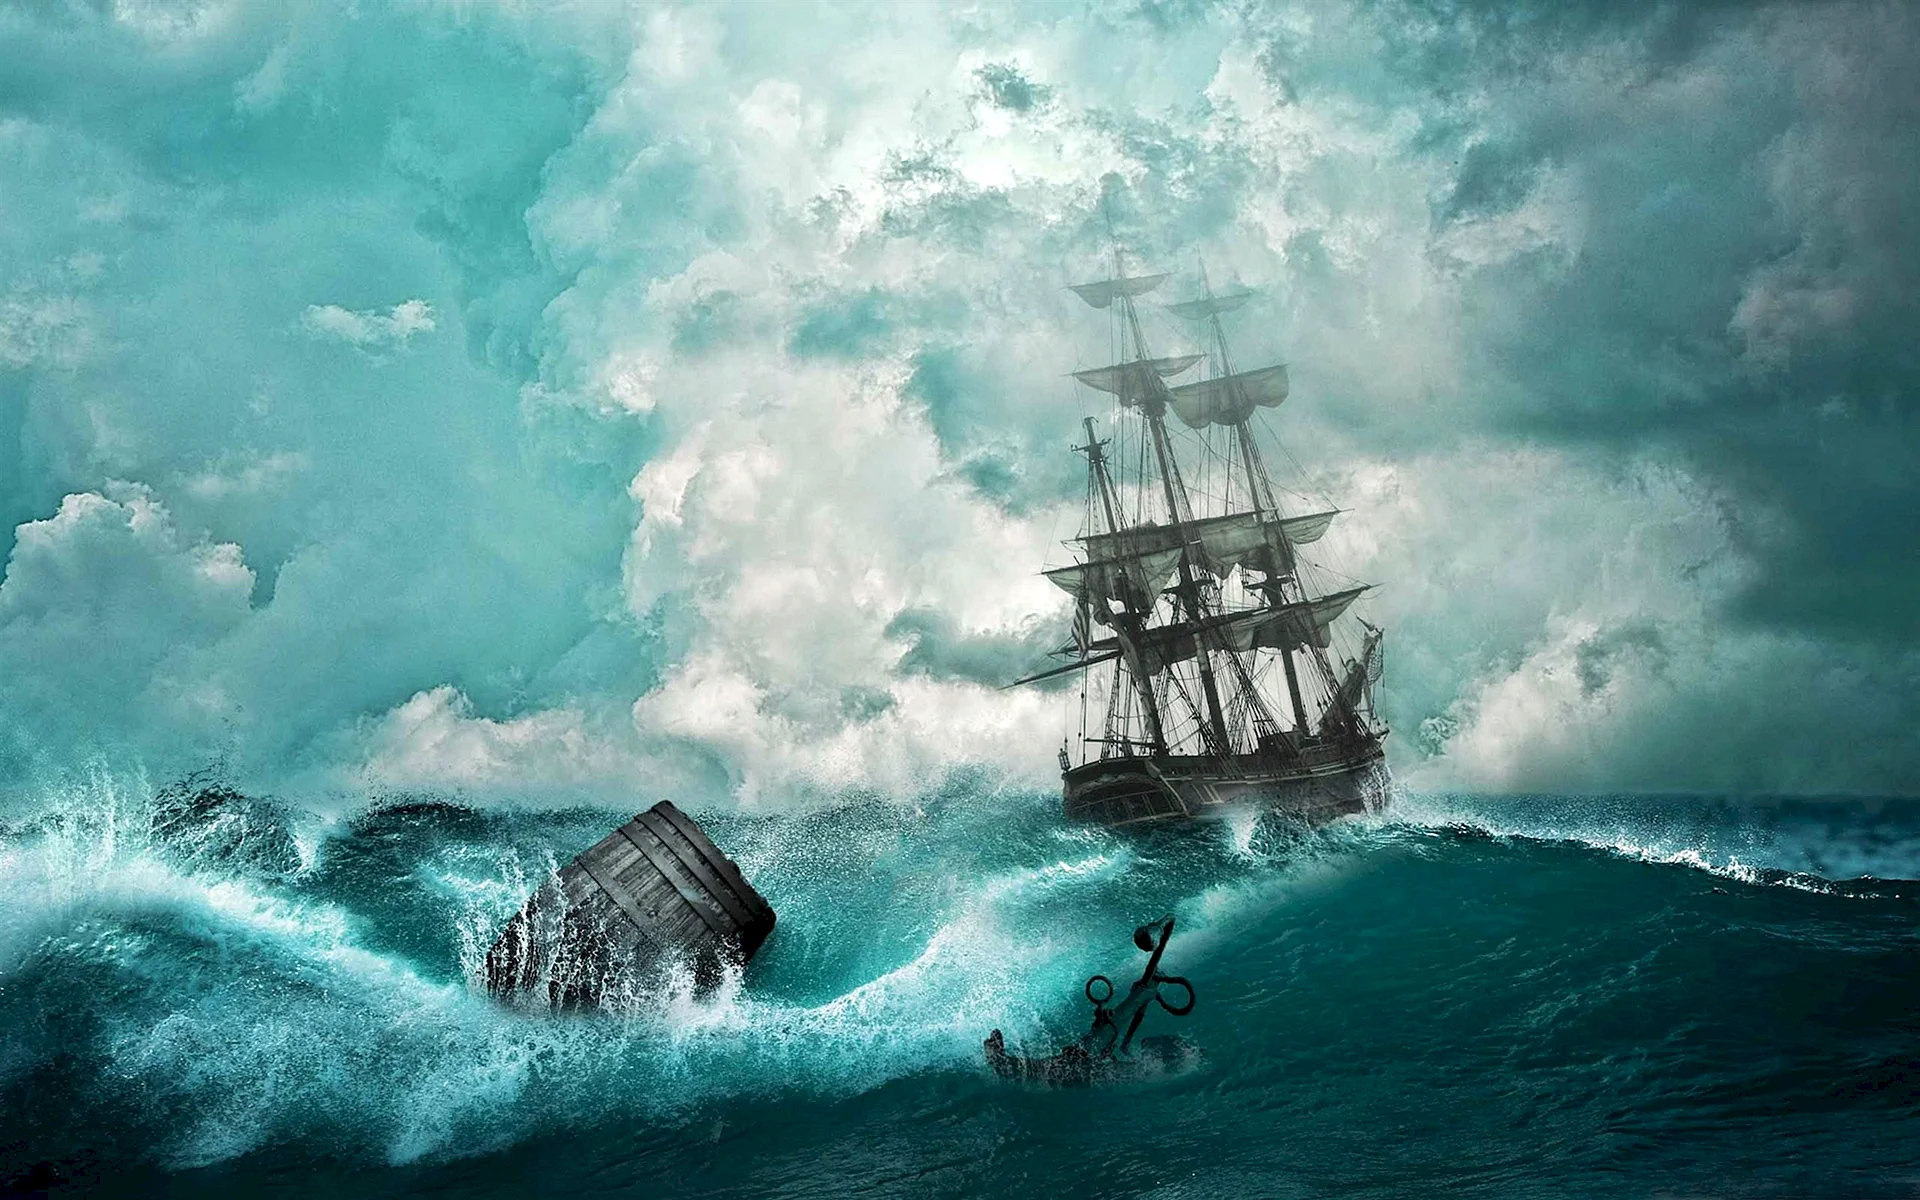 Pirate ship in Storm Wallpaper